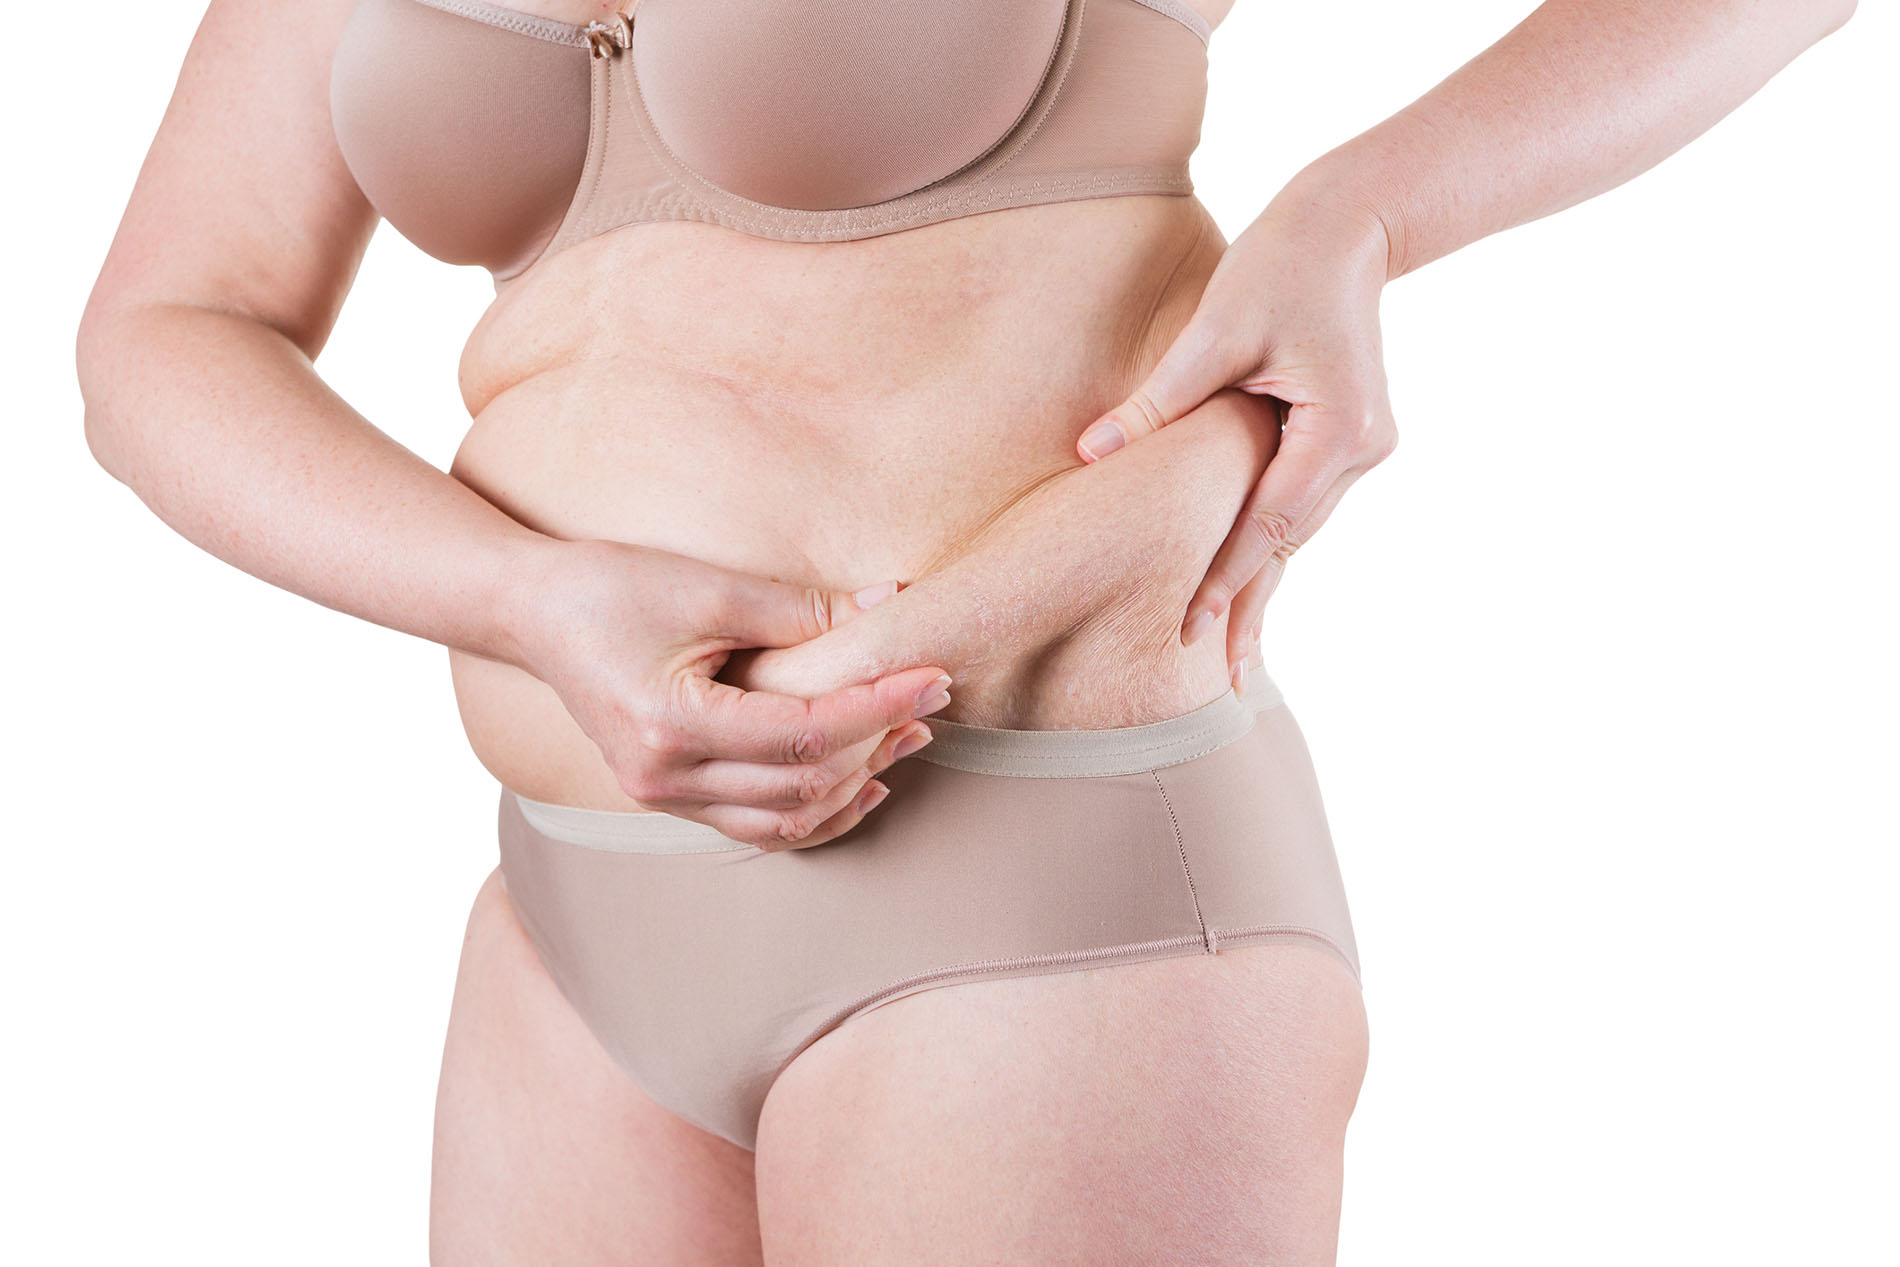 Treating Love Handles, Skin Conditions & Skin Concerns